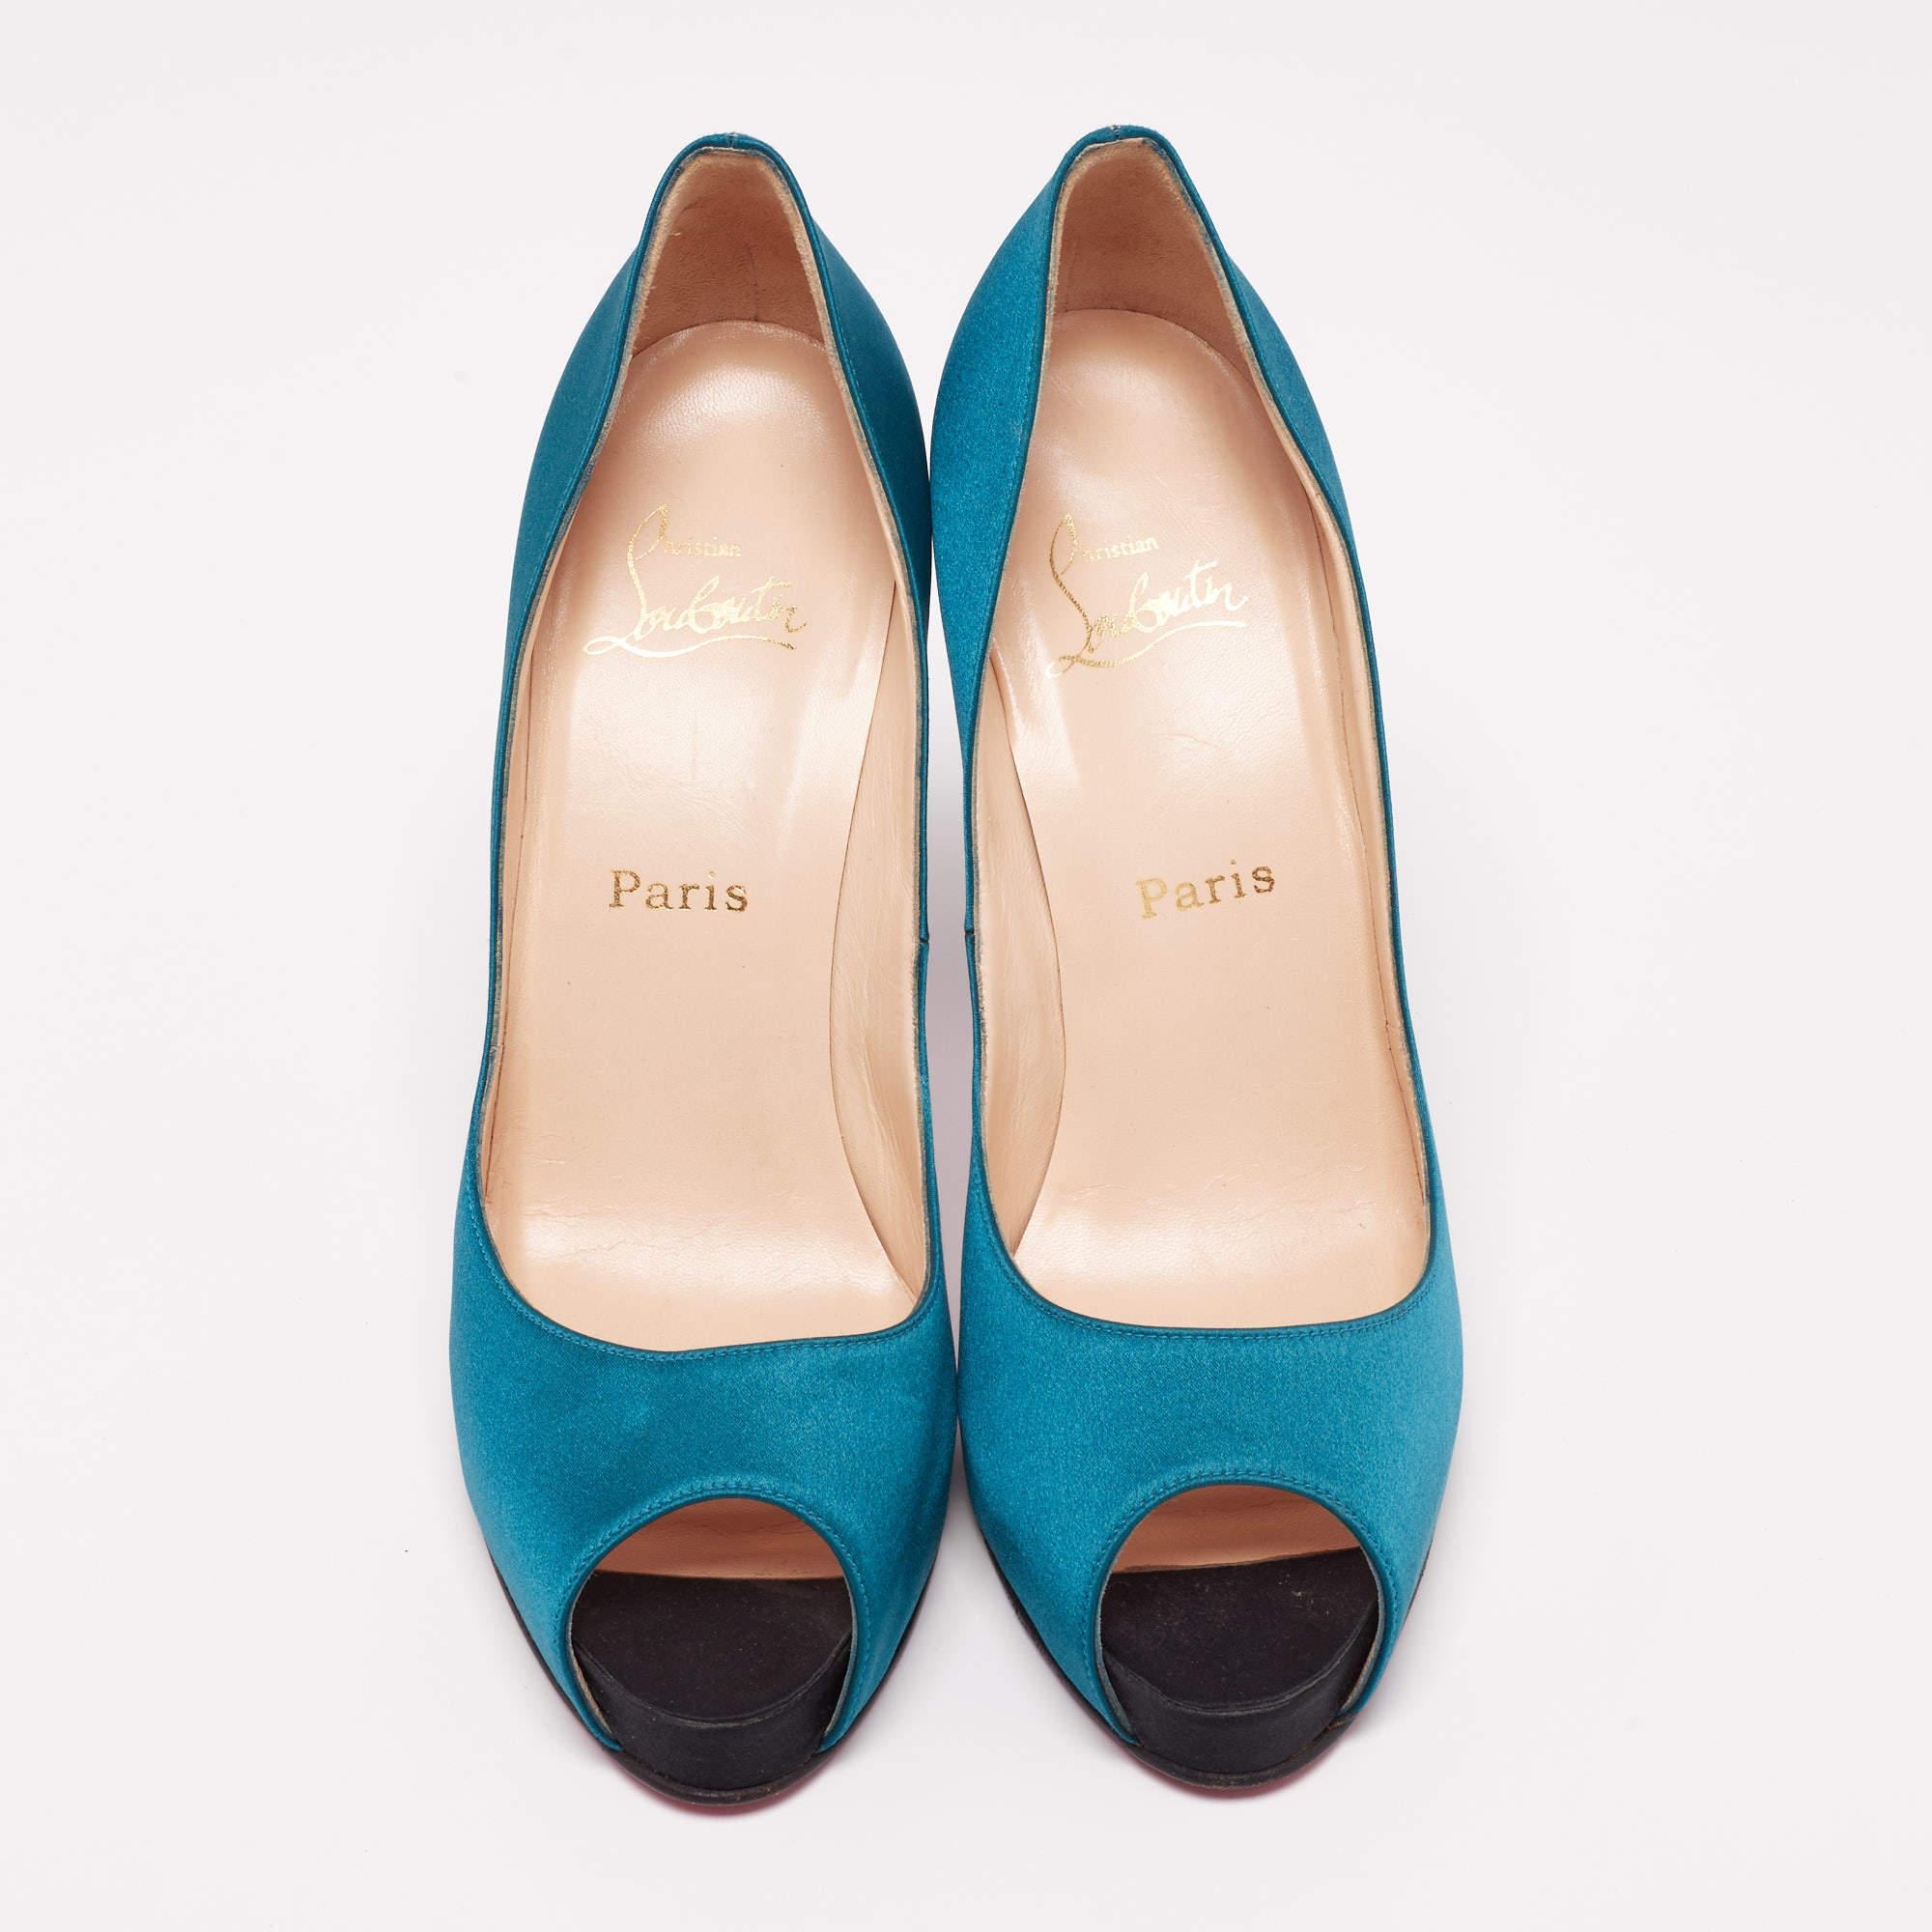 Exhibiting a chic silhouette enhanced with excellence, these Very Prive pumps from the House of Christian Louboutin exude signatory style! They are designed using blue-black satin on the exterior. These pumps have slim heels, peep-toes, platforms,